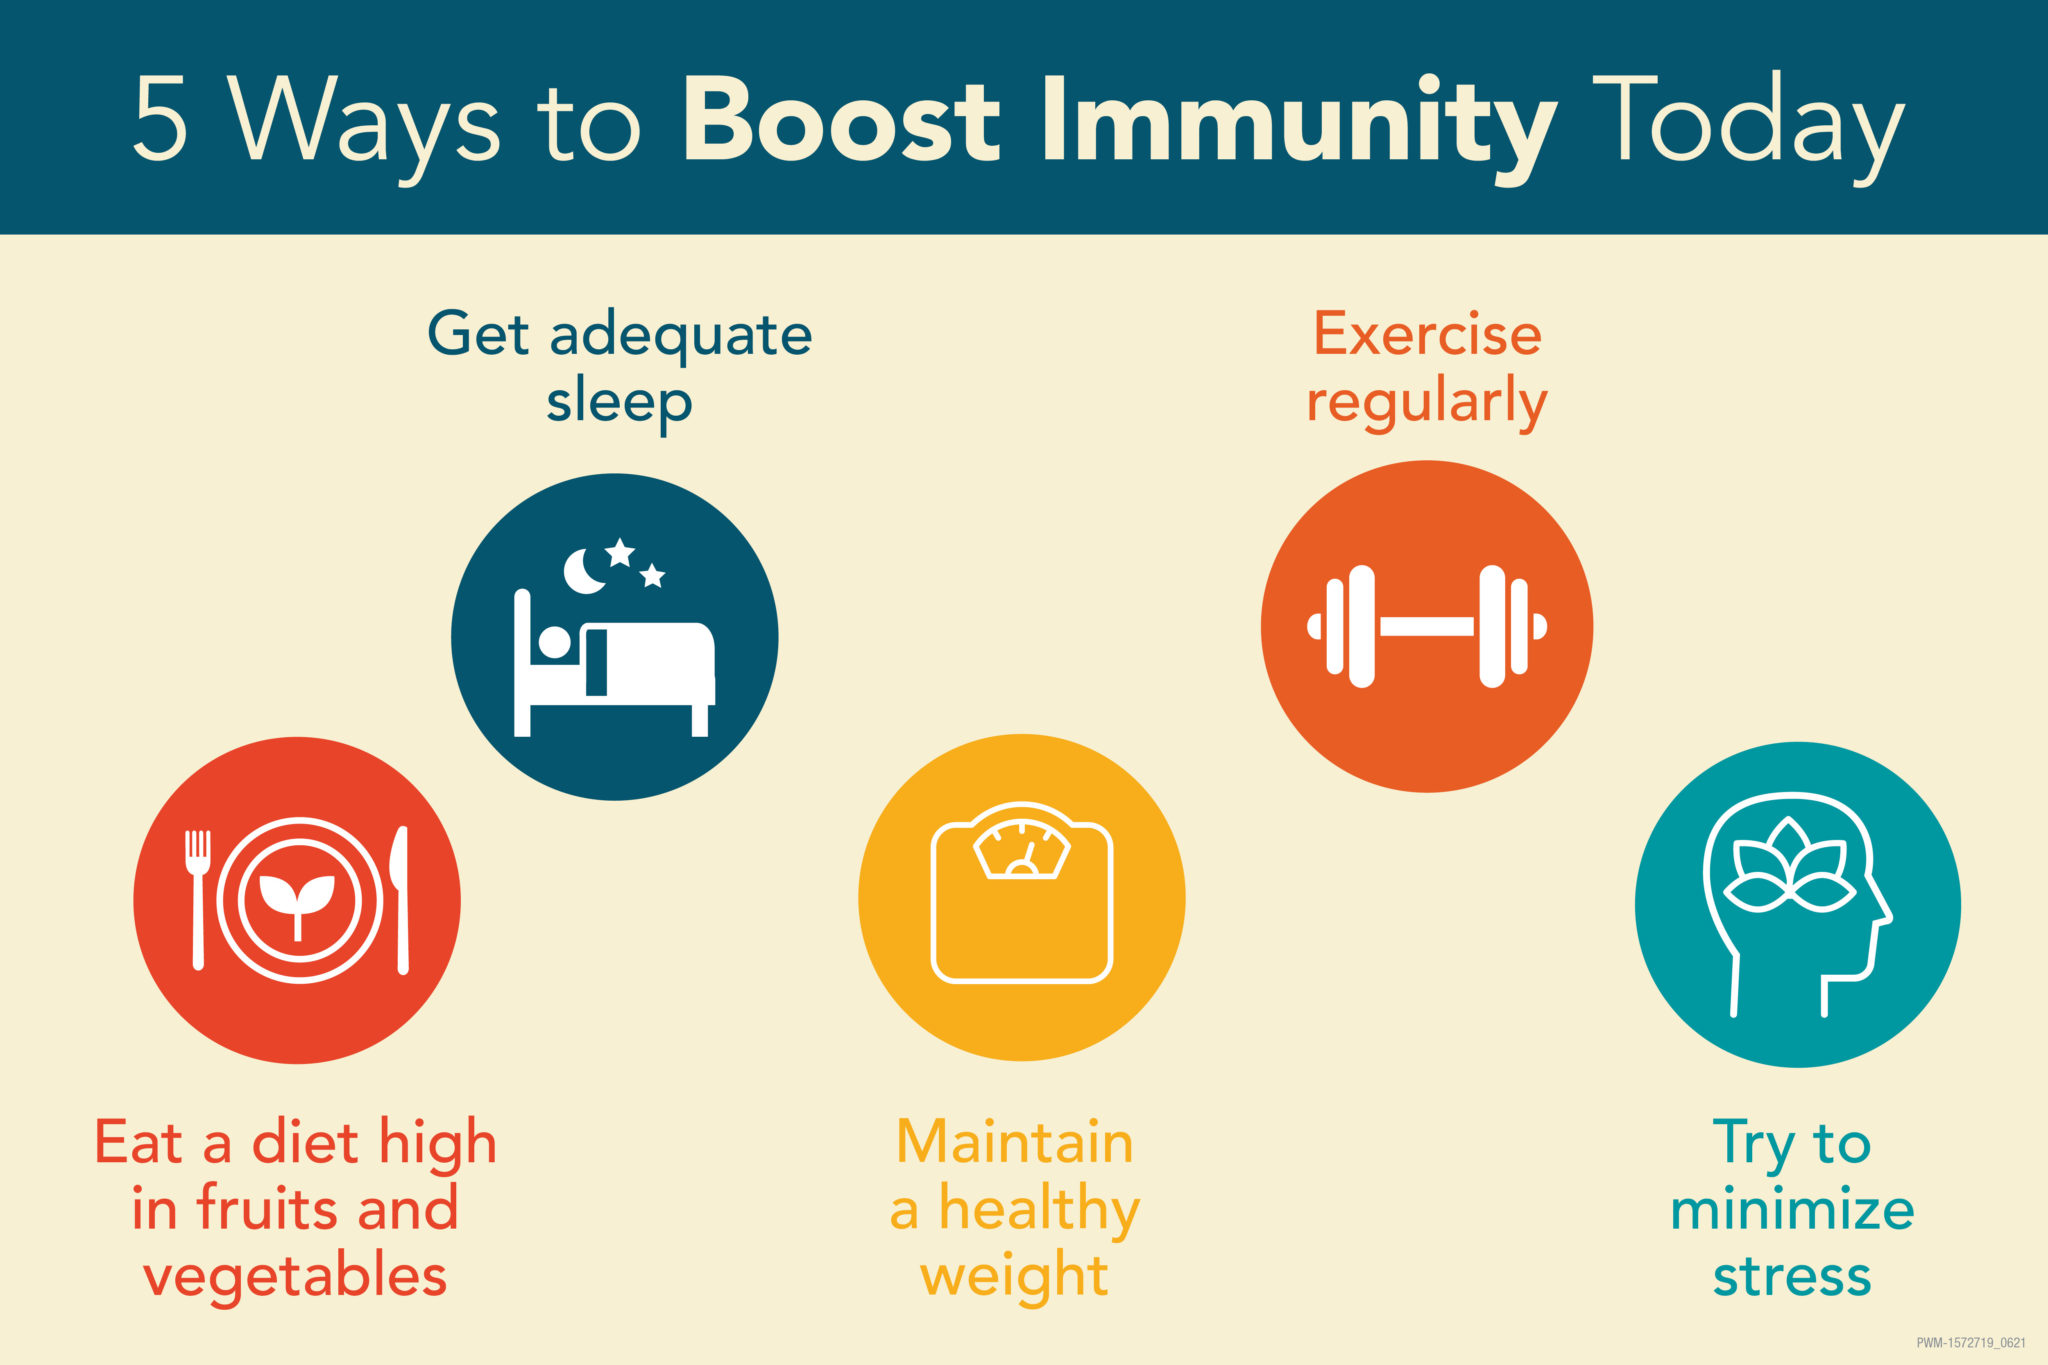 Immune-boosting tips and tricks